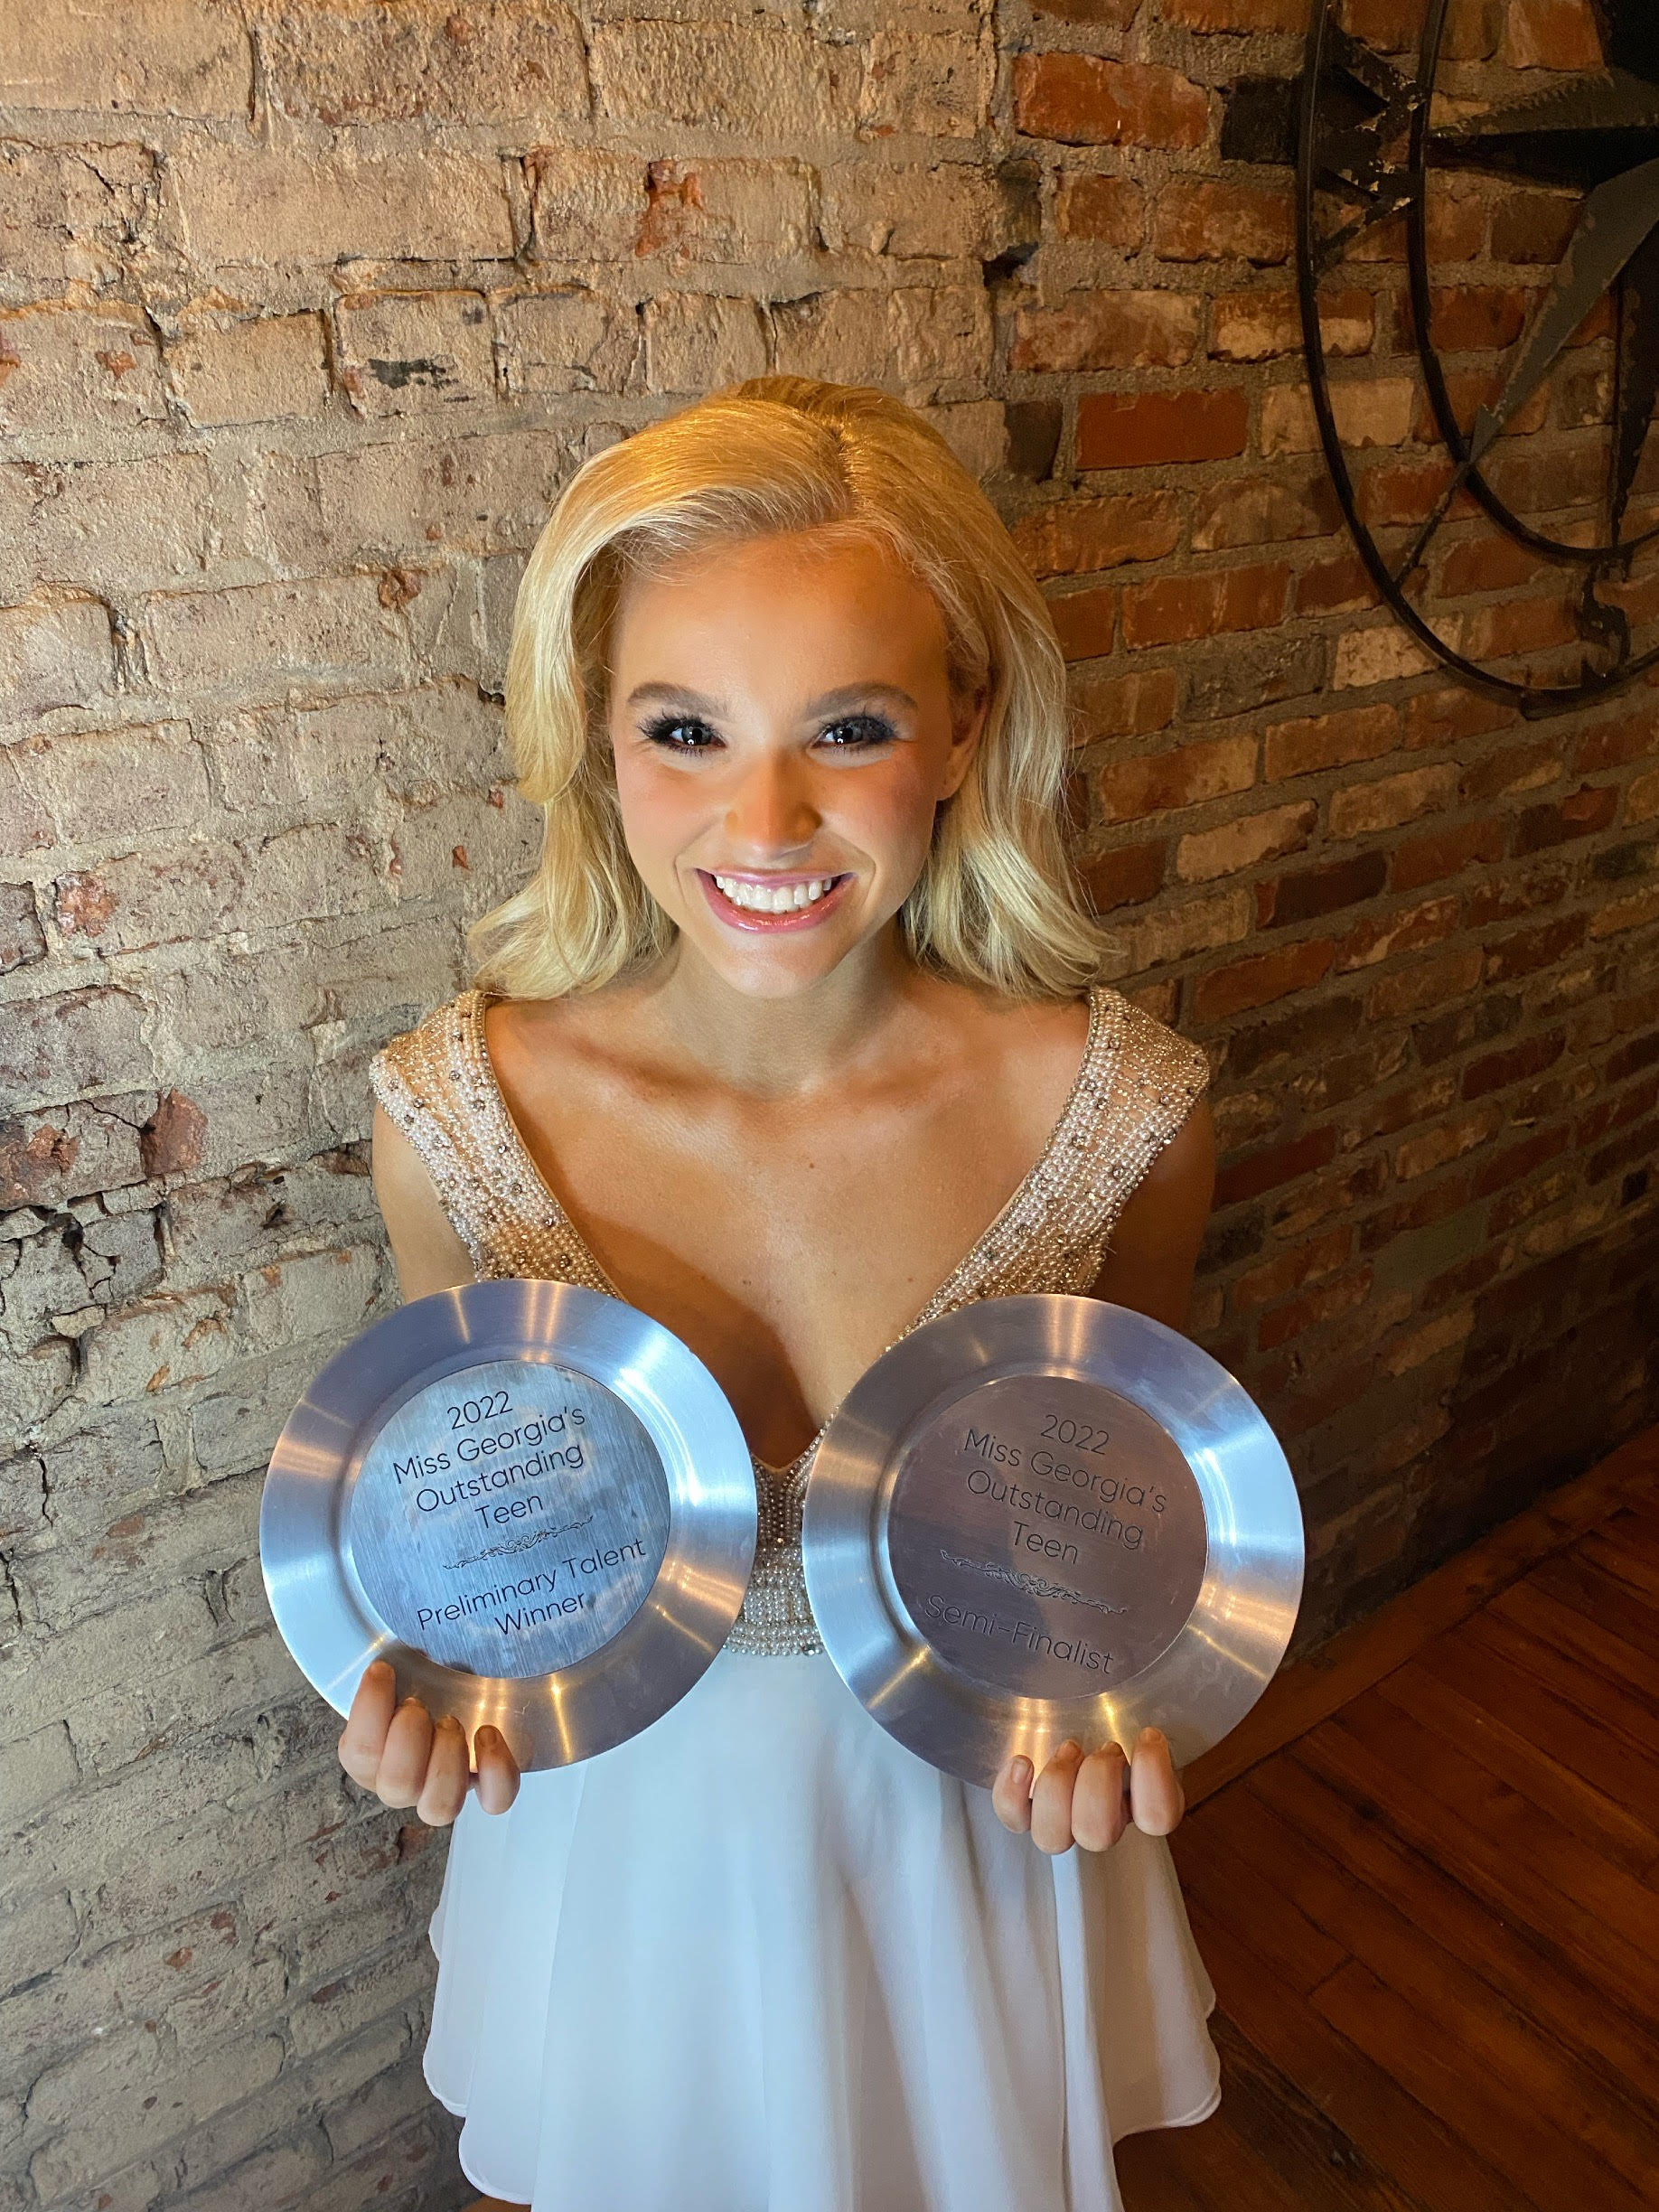 Pictured is Mary Margaret Waddell with her awards from Miss GAOTeen. We are so proud of her!